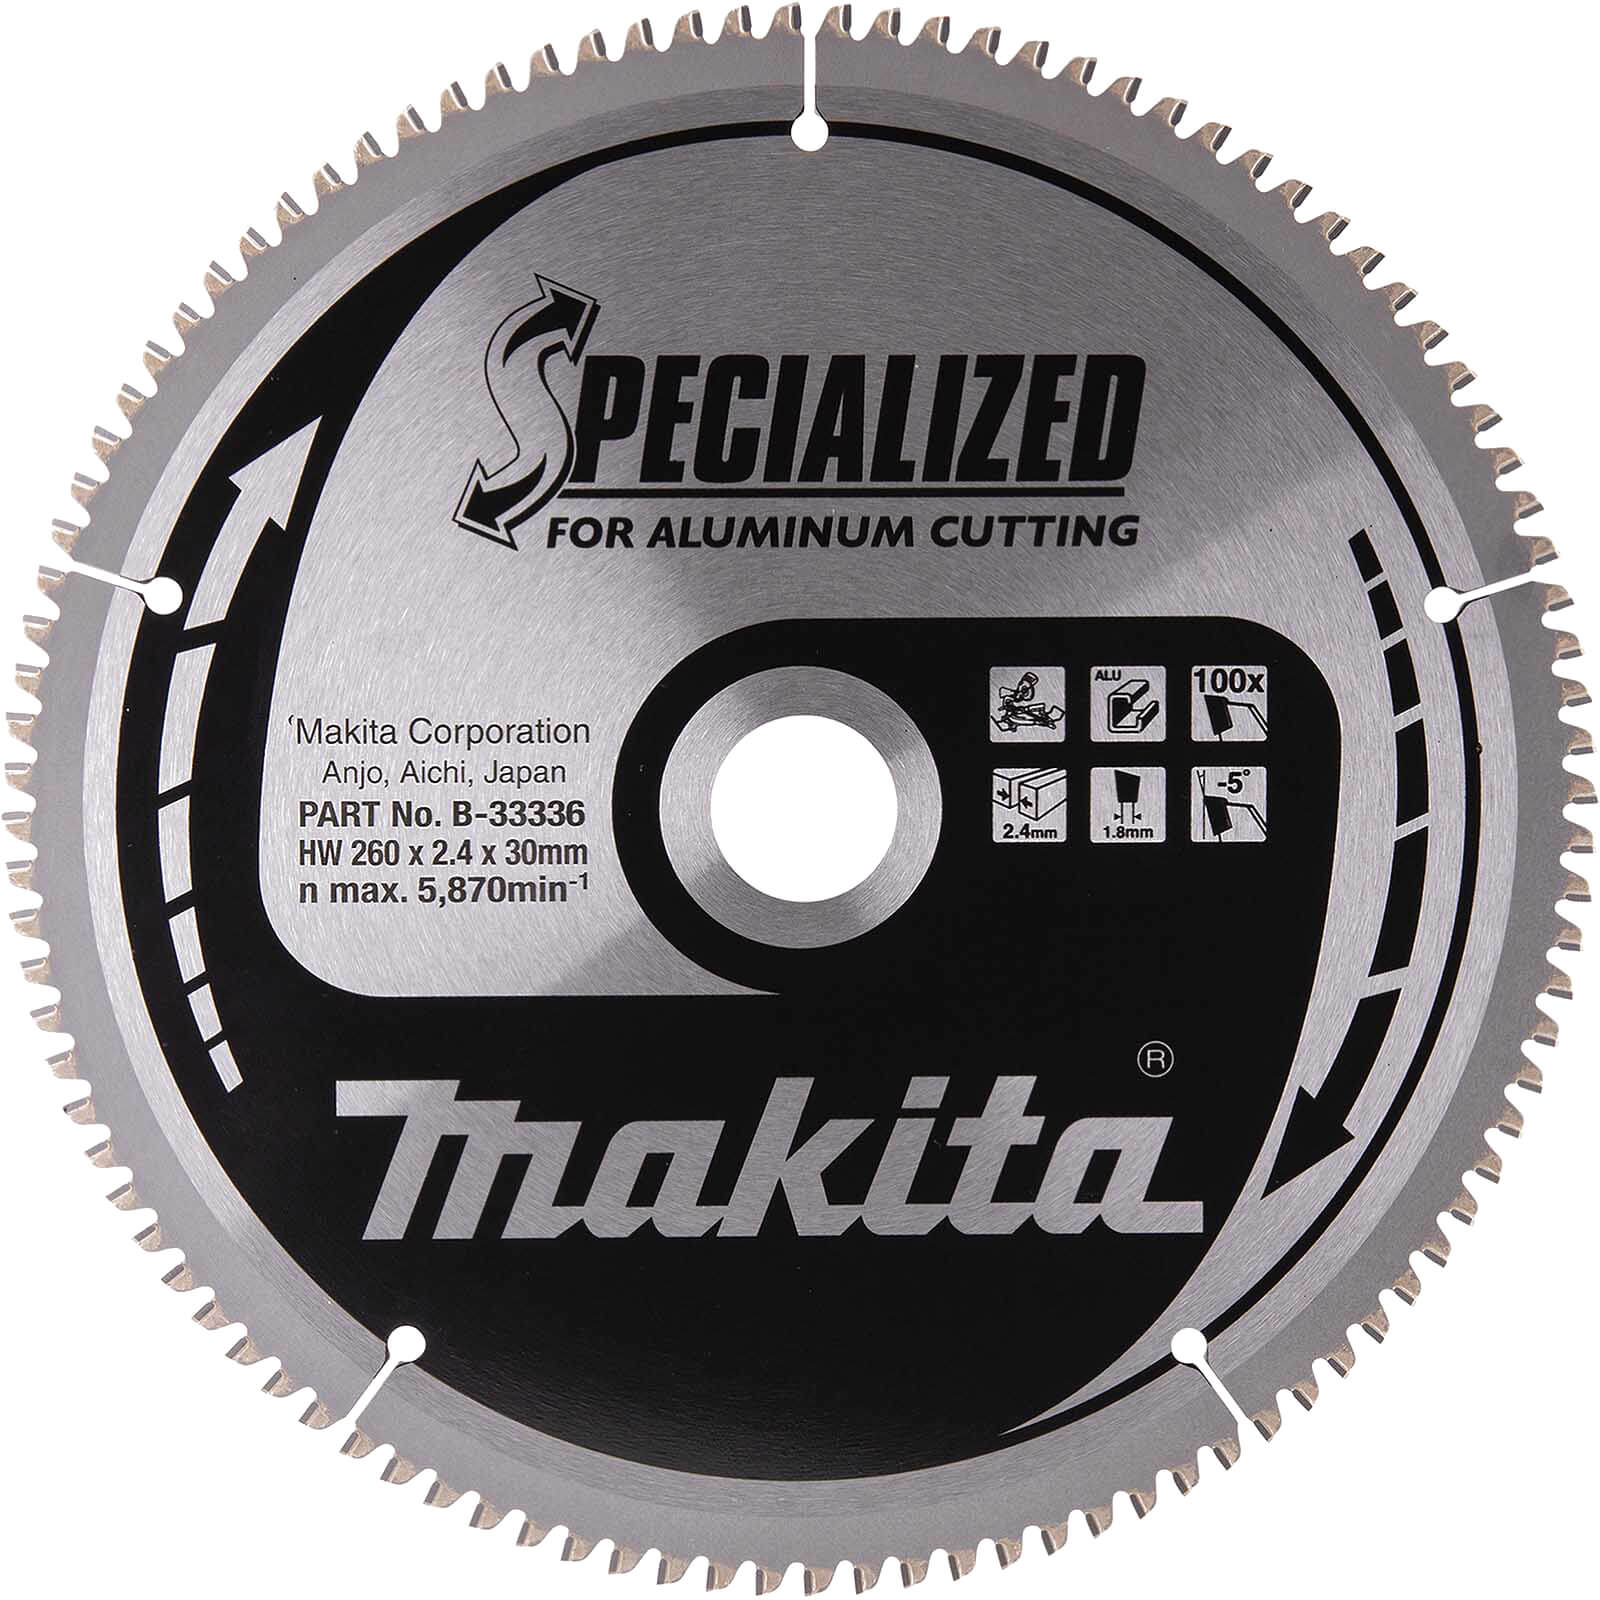 Photos - Power Tool Accessory Makita SPECIALIZED Circular Saw Blade for Aluminium Cutting 260mm 100T 30m 